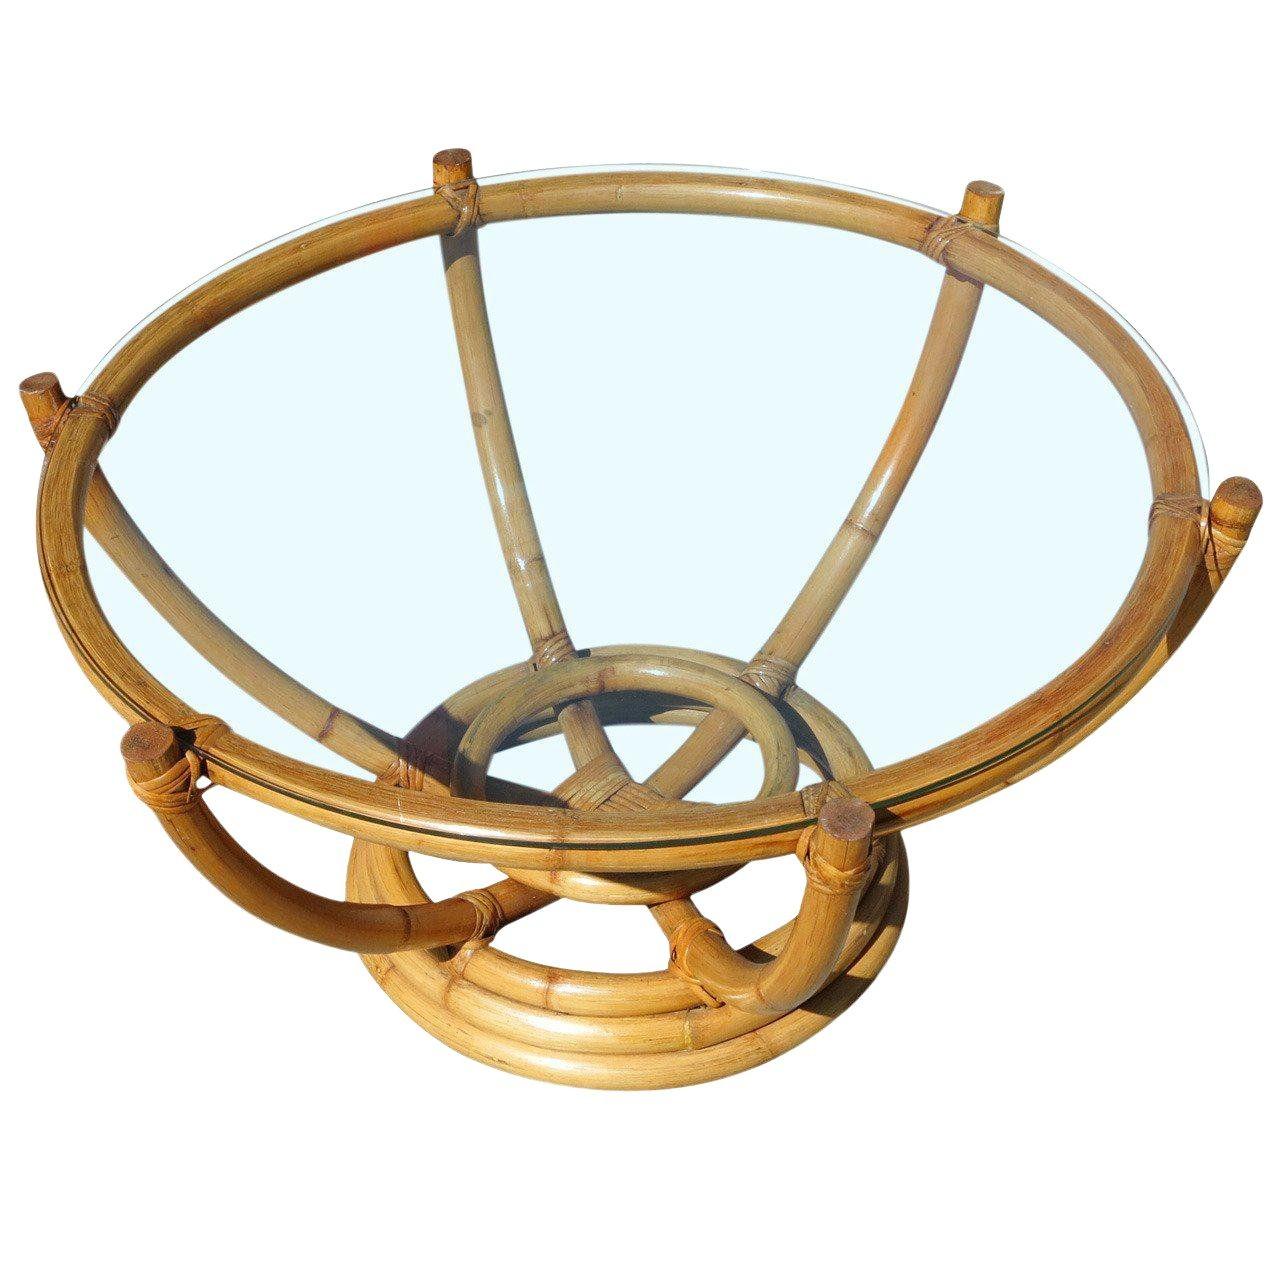 Circa 1940 Mid-century six-pole rattan coffee table with stacked rattan round base. The six rattan poles organically branch outward to a circular top made of a single piece of bent rattan. The glass top rests atop the poles, exuding an almost